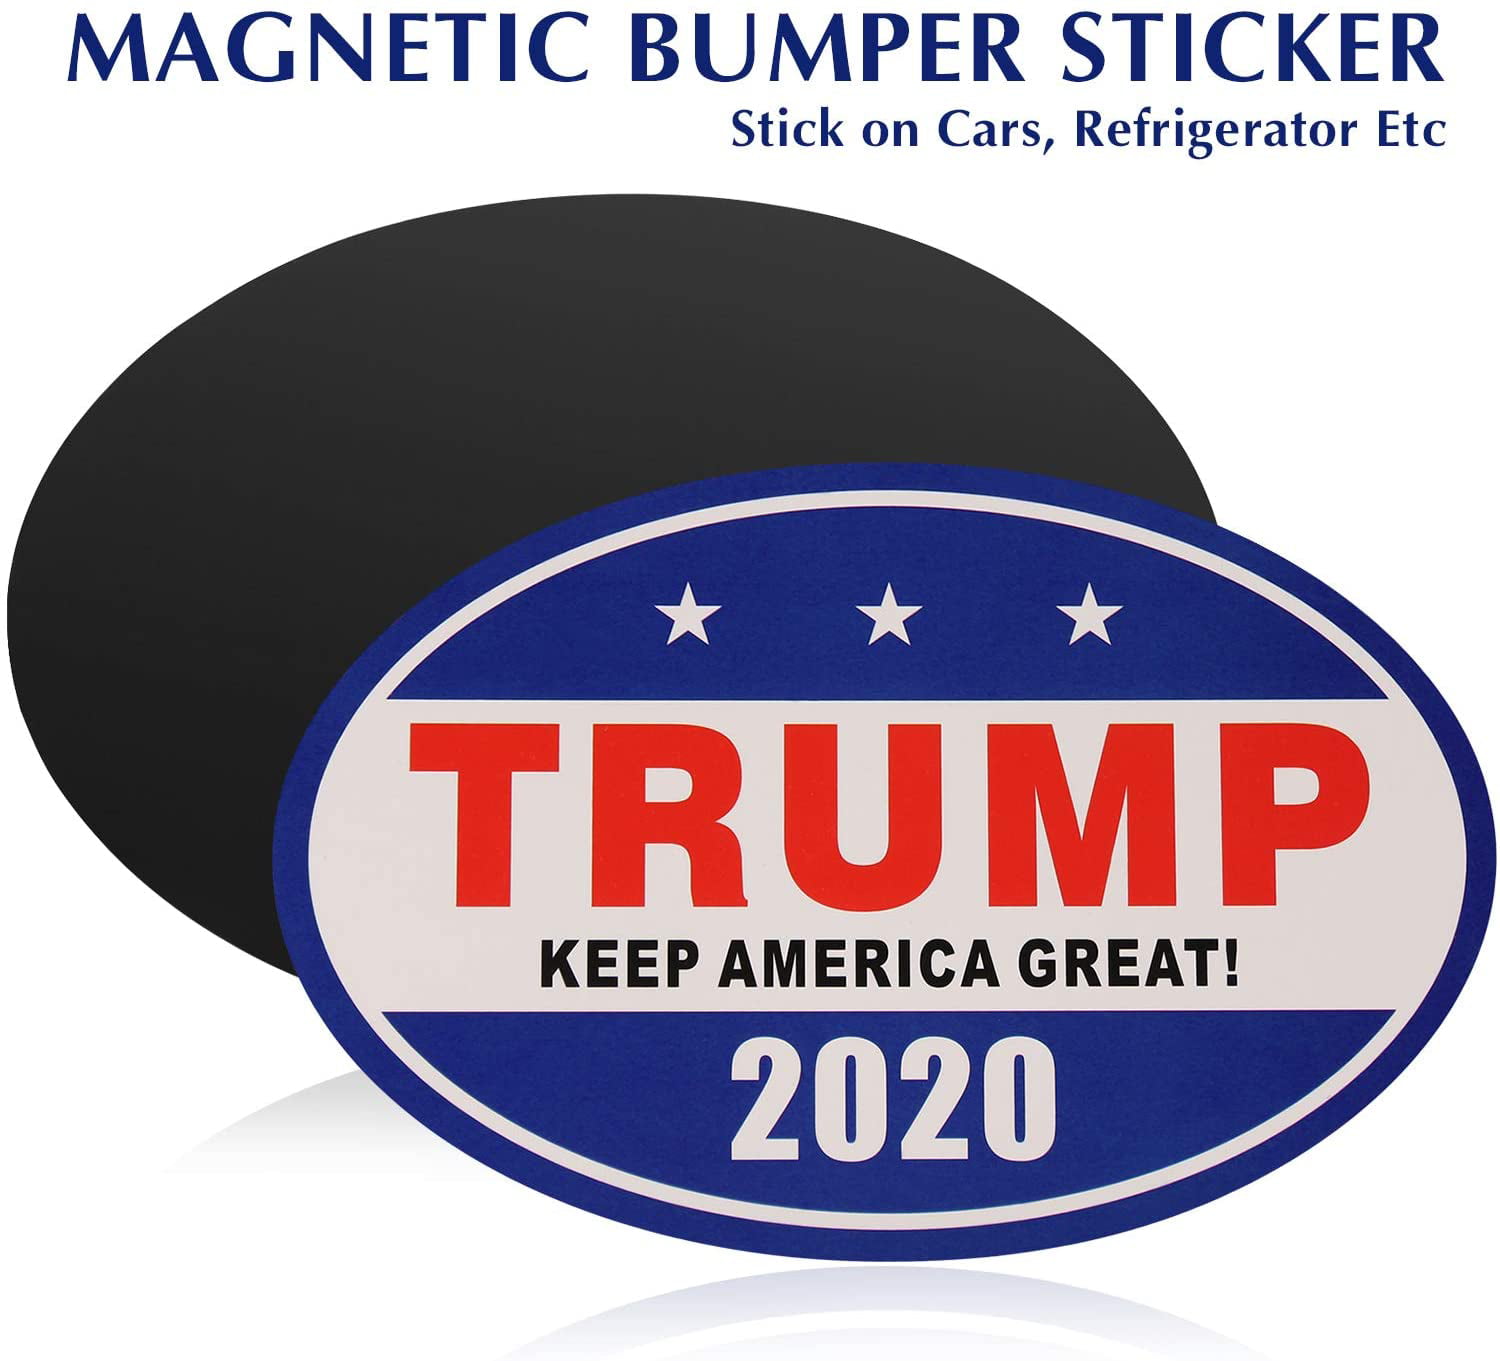 Dogs For Trump Decal White Vinyl Bumper Sticker Make Keep America Great